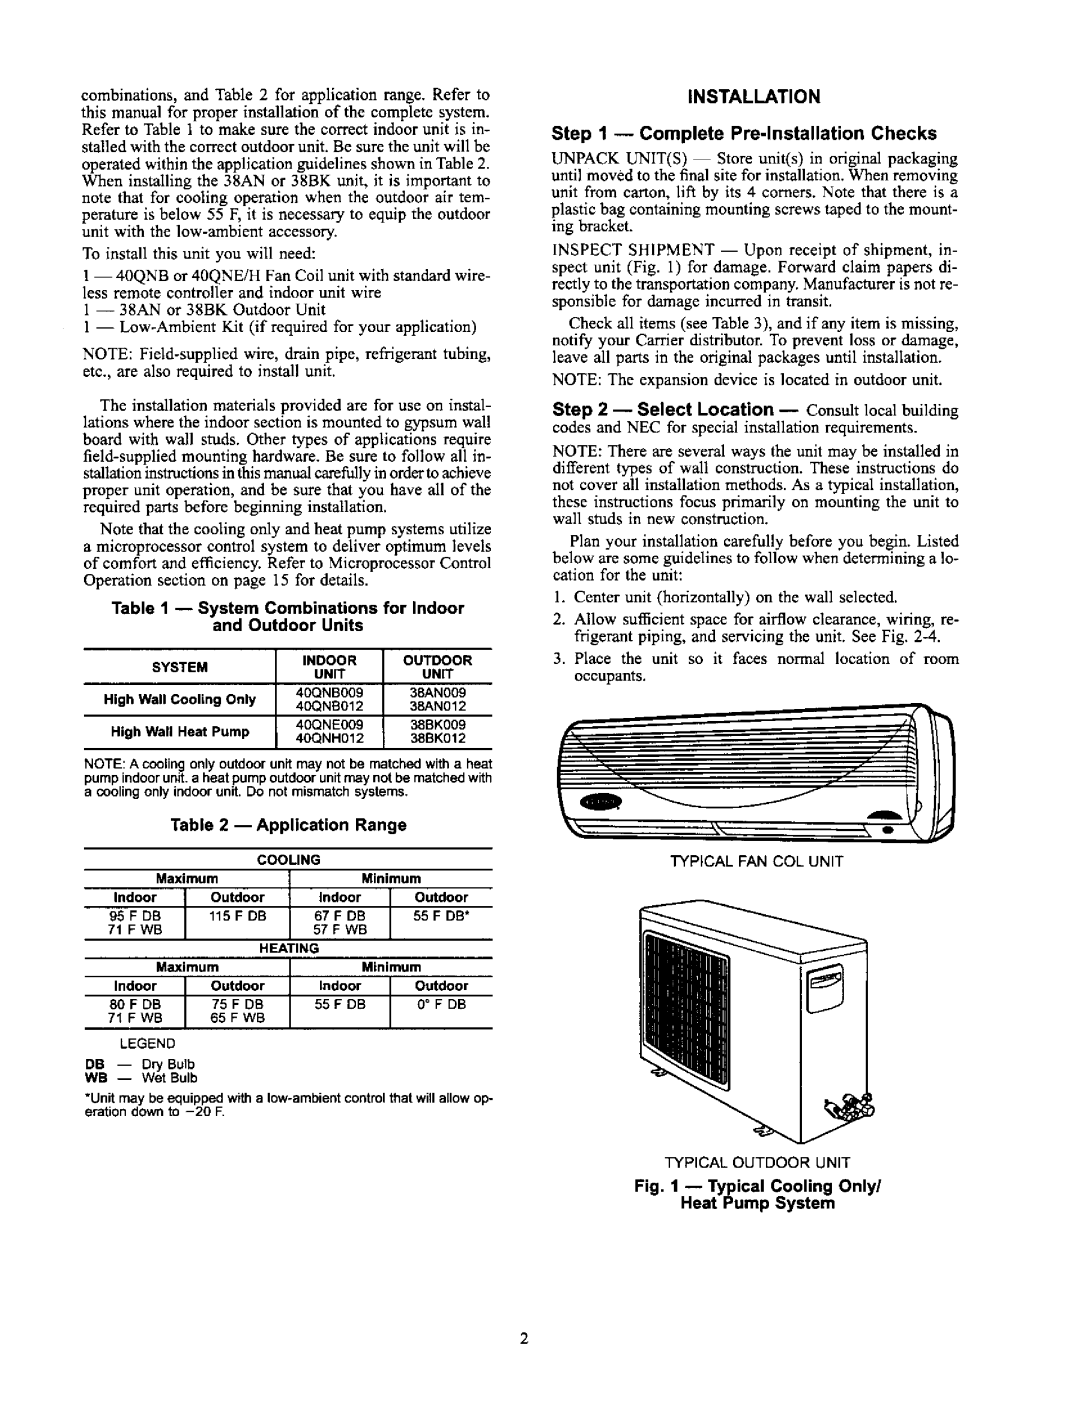 Carrier 38AN,BK specifications System Combinations for Indoor, and Outdoor Units, Installation, Typical Fan Col Unit 